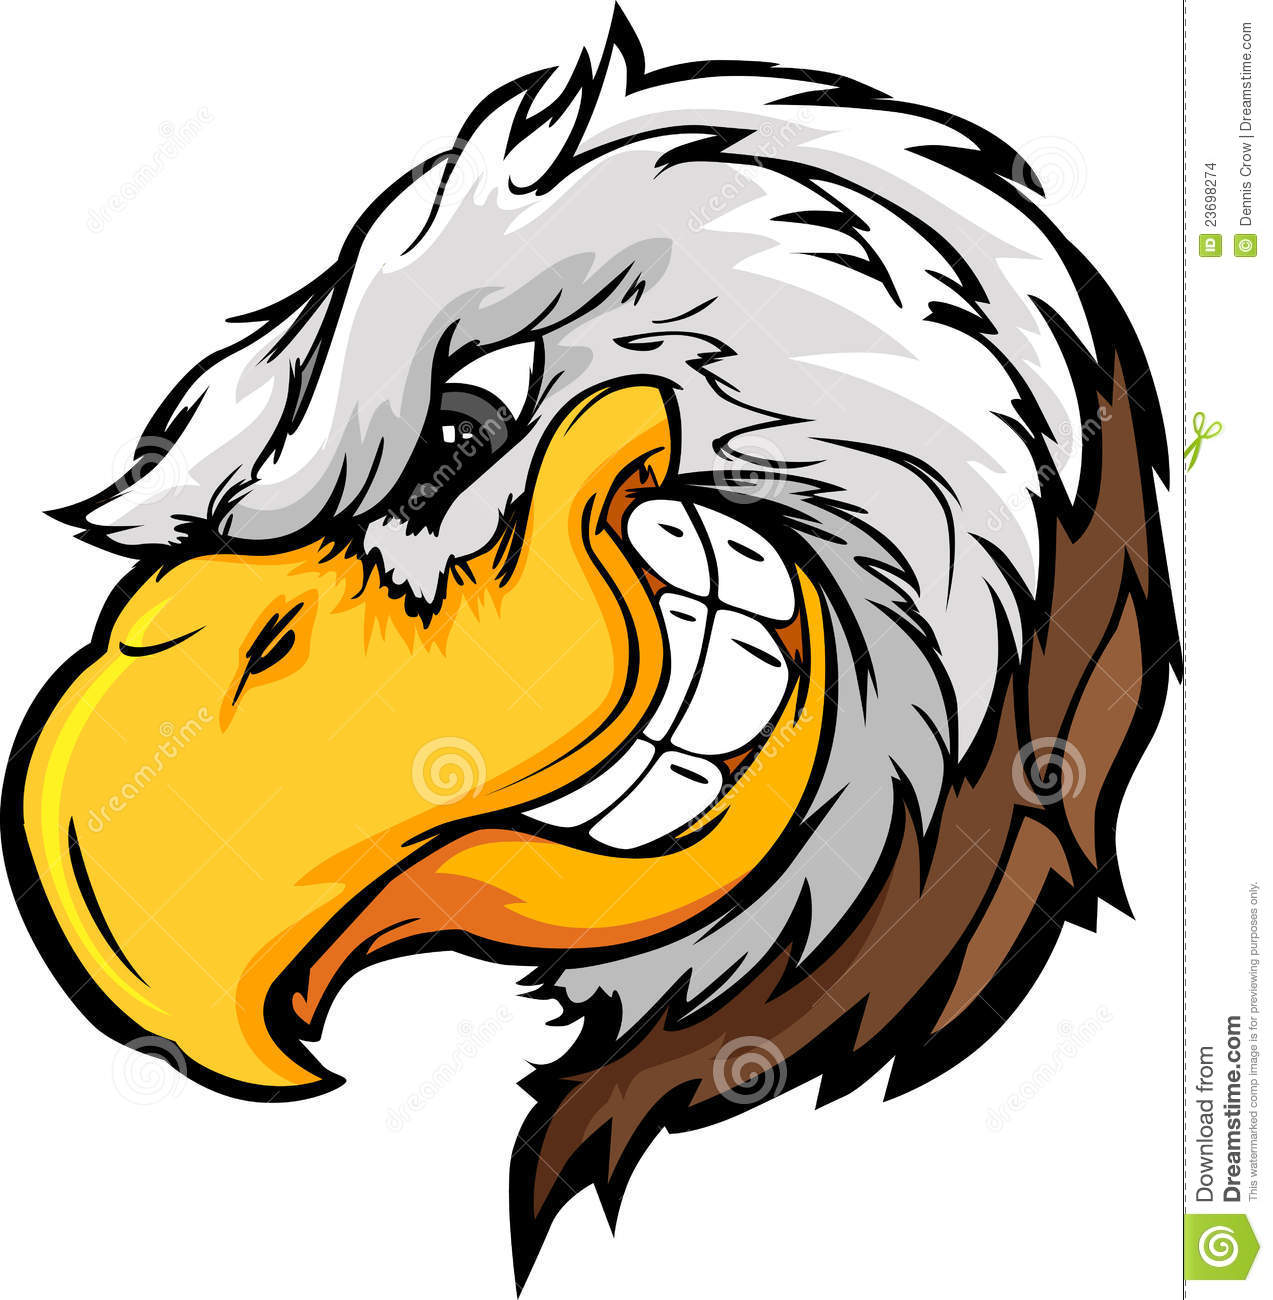 Eagle Mascot Head With Sly Expression